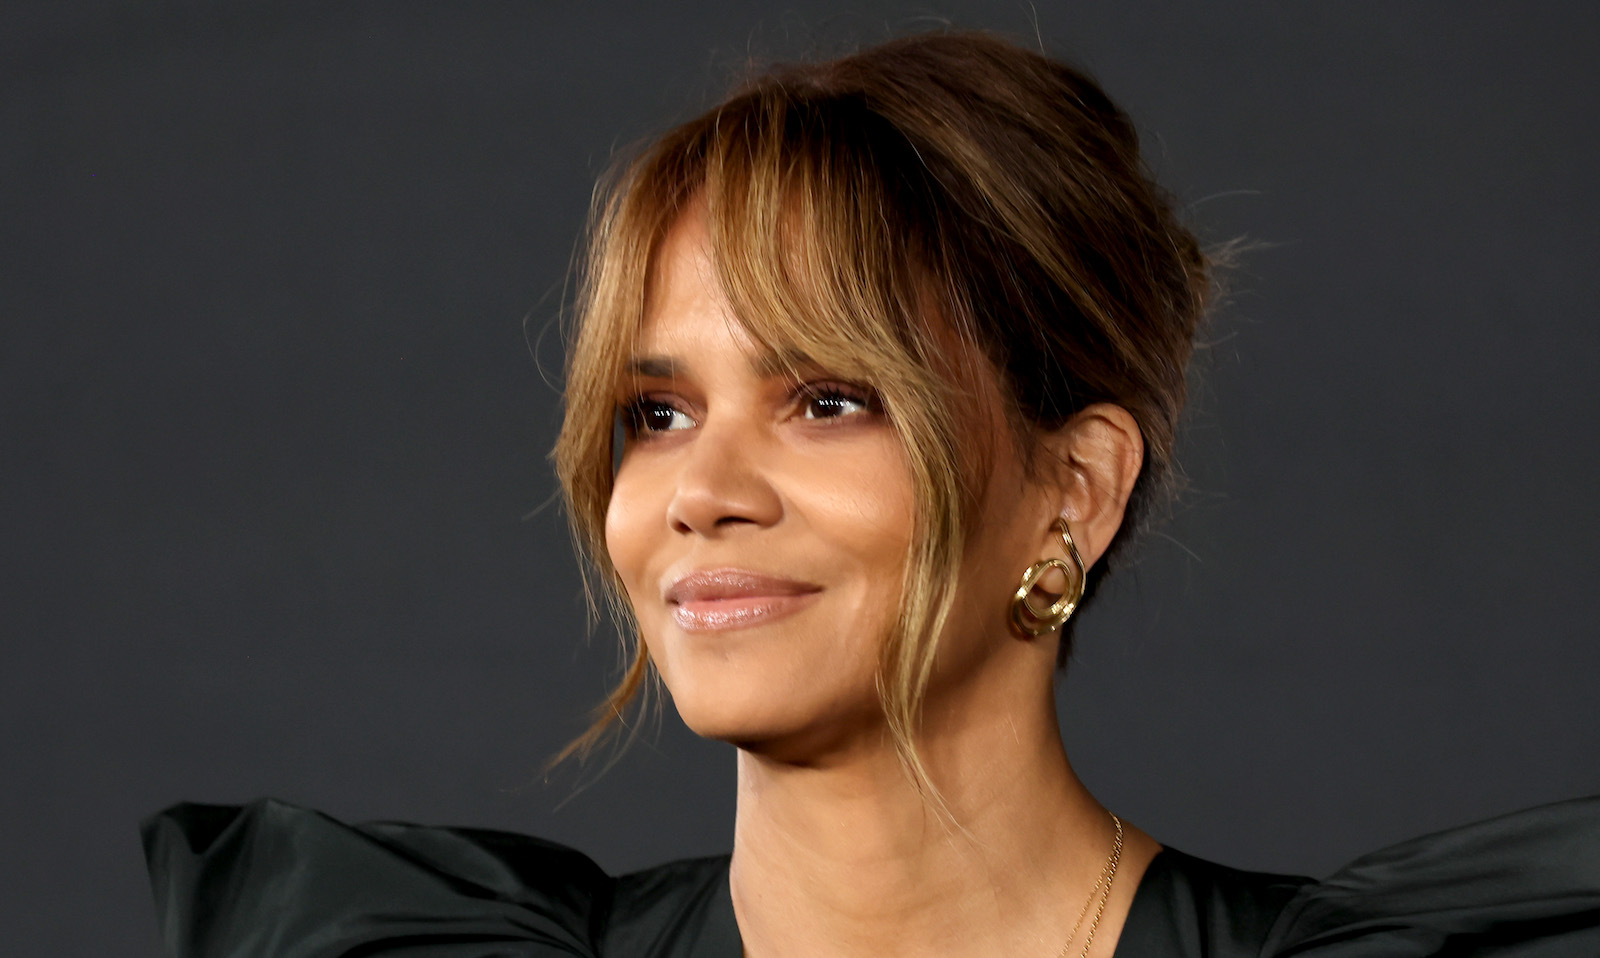 Halle Berry to Star in a Thriller From Producers Behind 'Stranger Things'